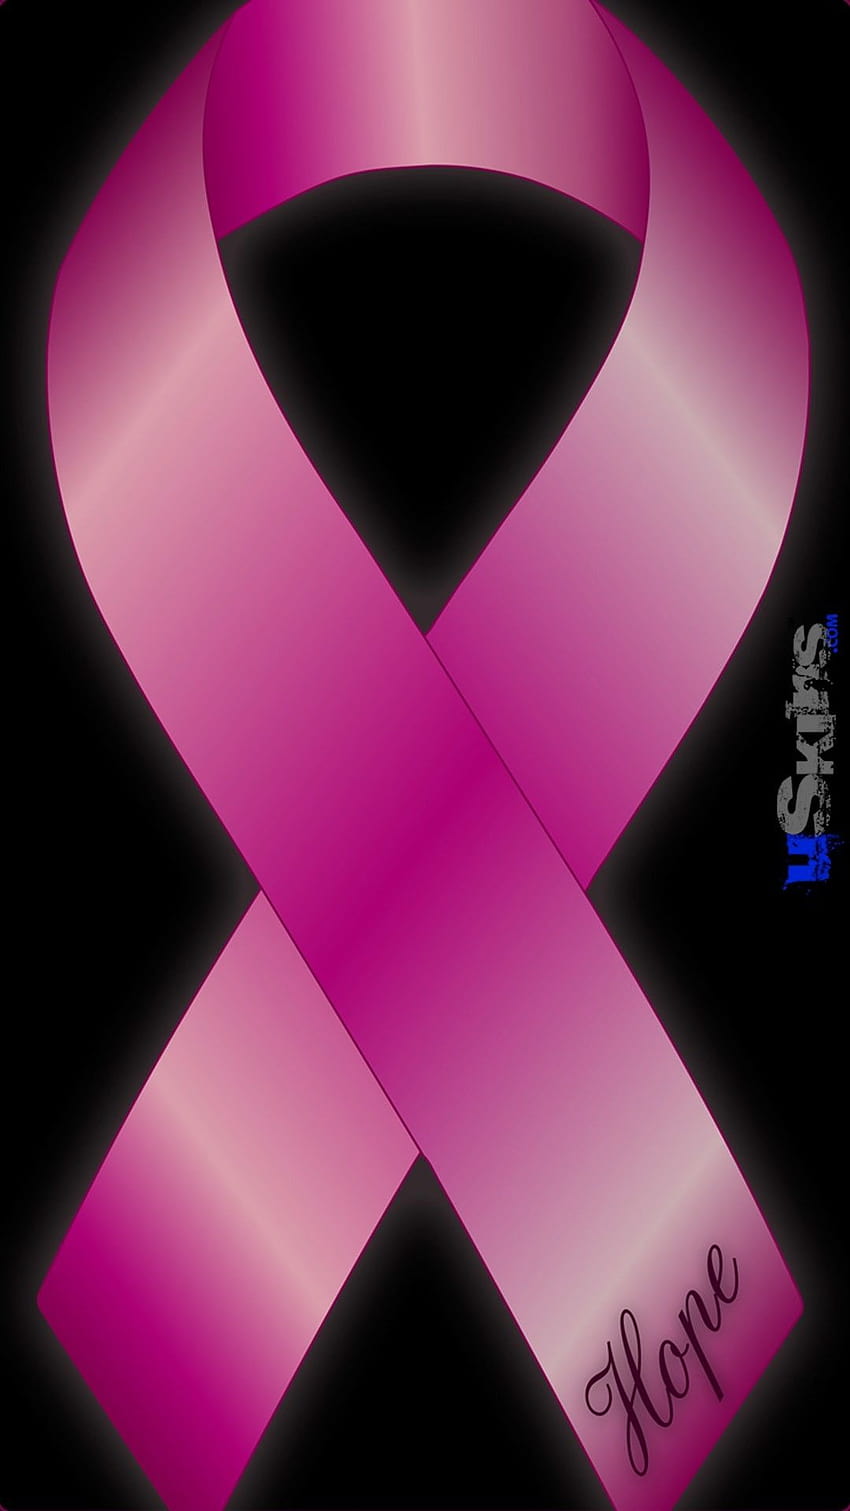 Breast Cancer Awareness posted by Sarah Cunningham, international day against breast cancer HD phone wallpaper